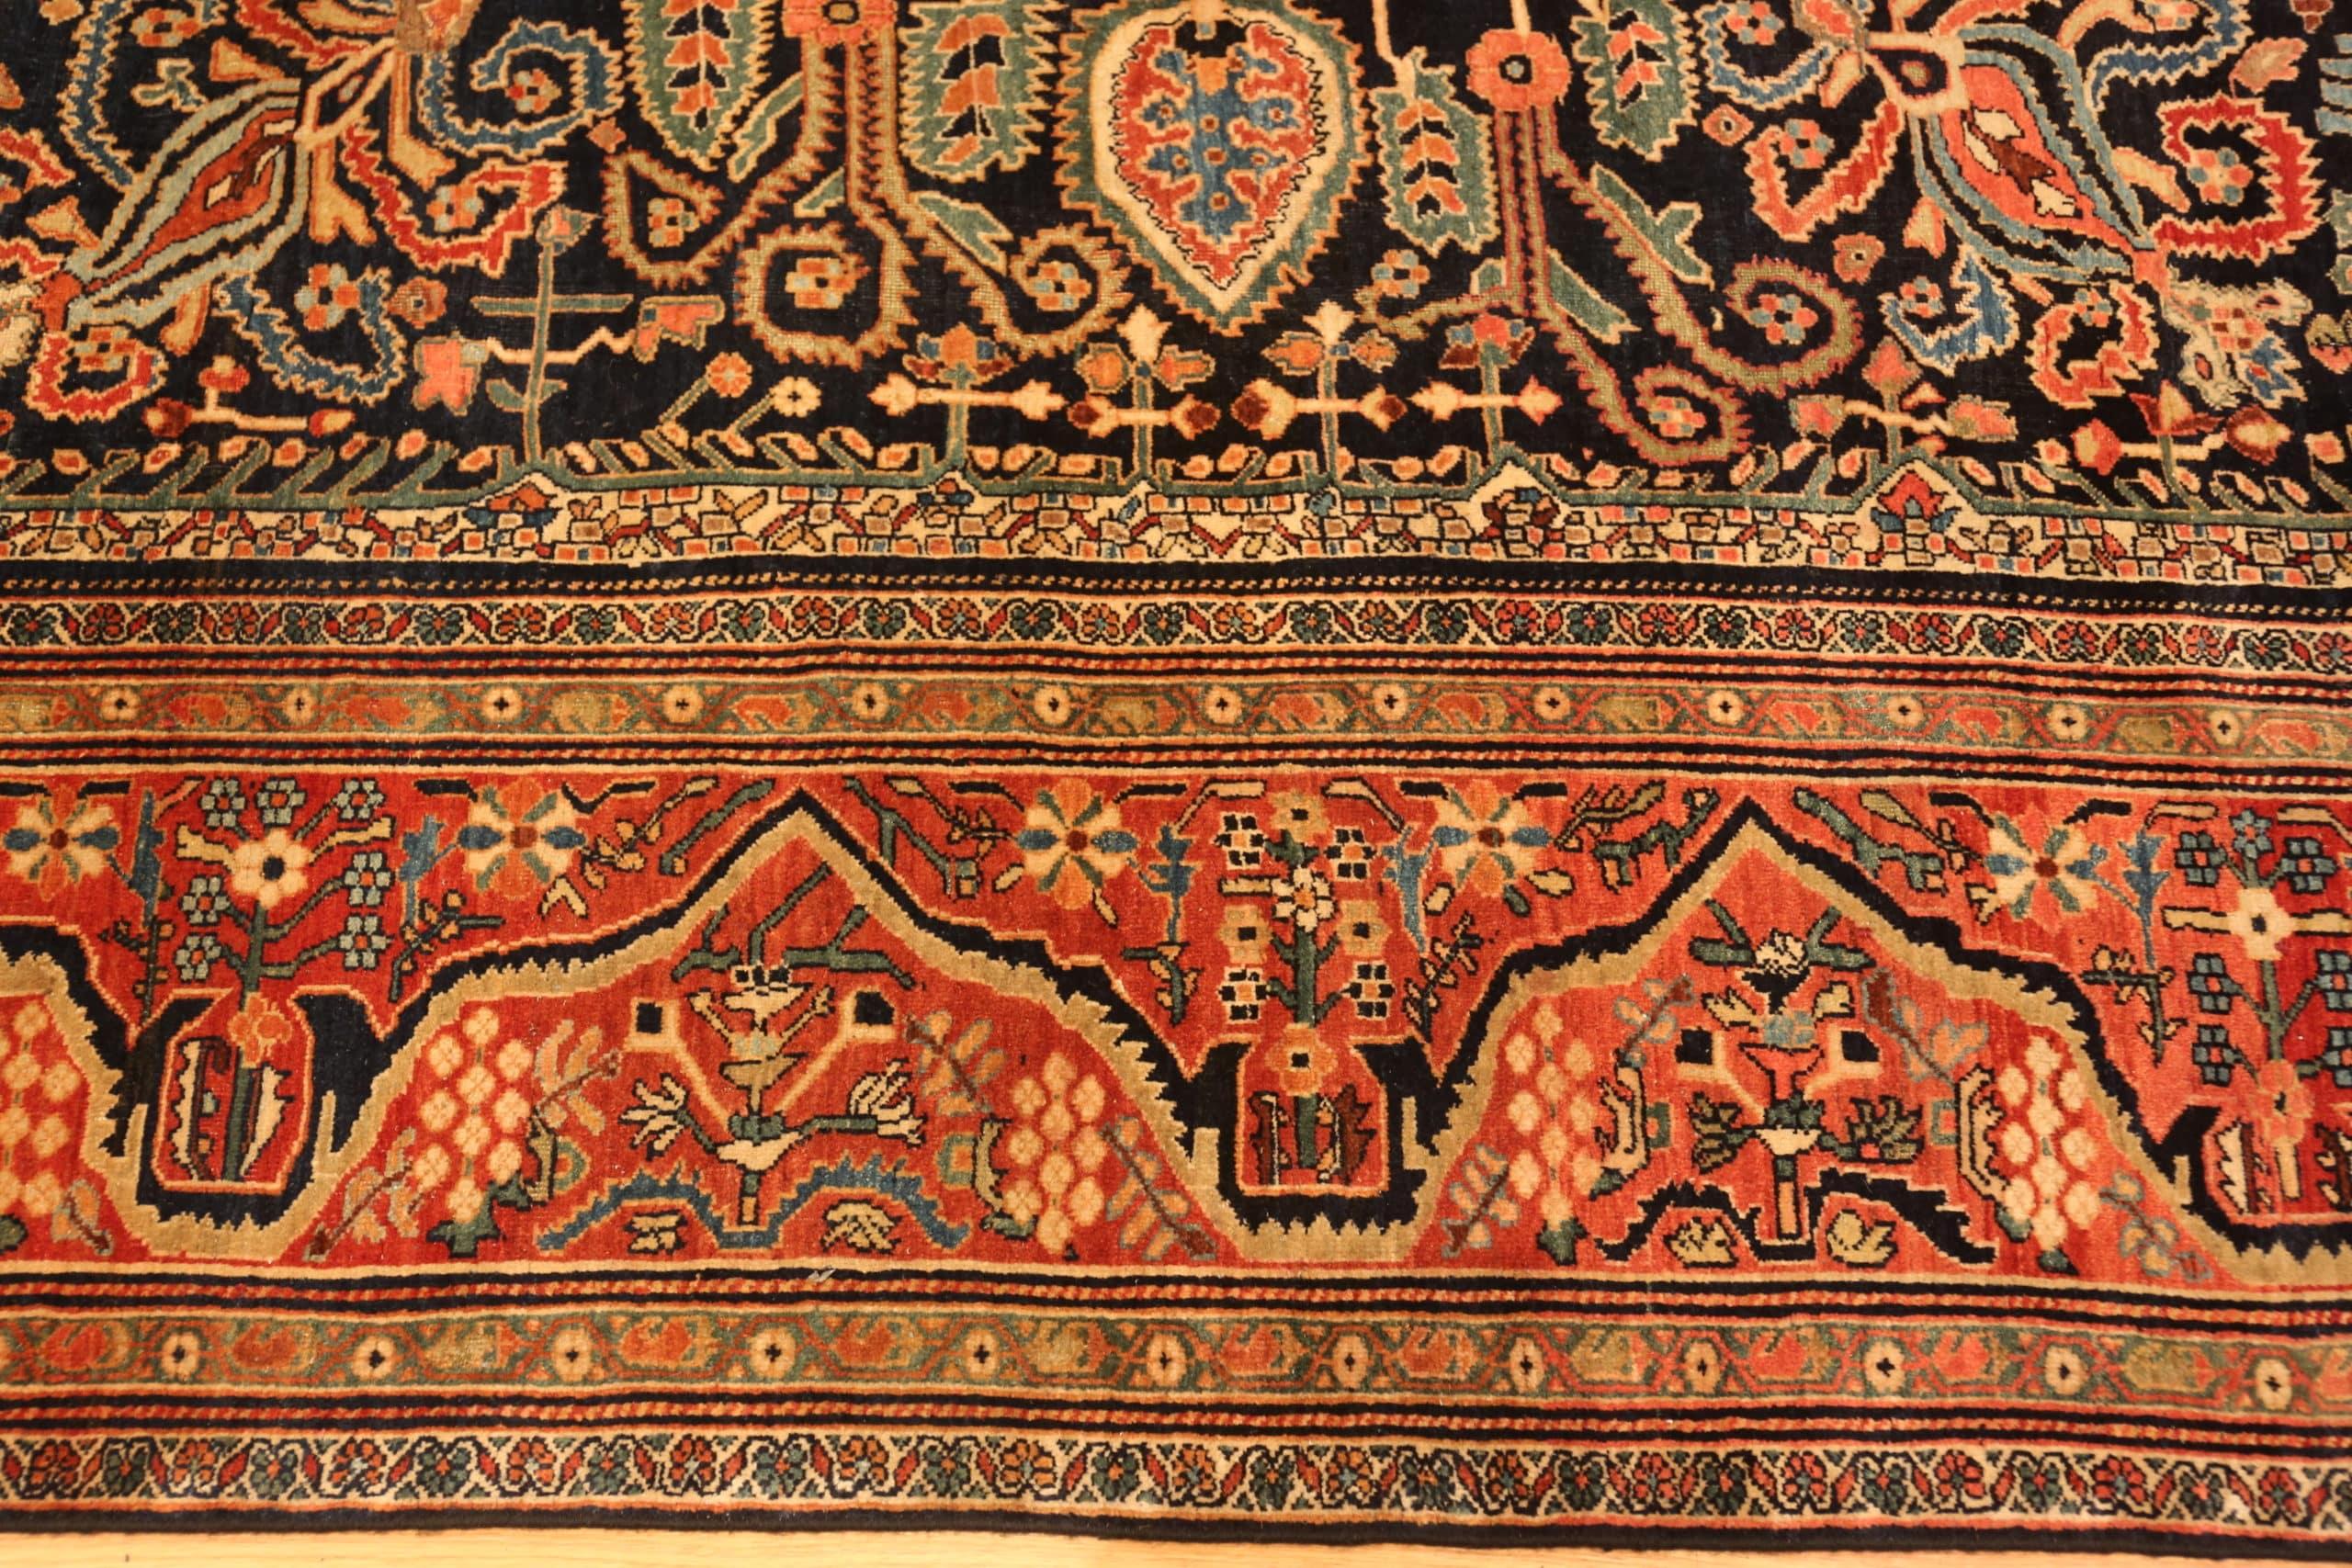 Antique Persian Sarouk Farahan Area Rug, Country of origin / rug type: Persian rug, Circa date: 1880. Size: 8 ft 4 in x 12 ft 5 in (2.54 m x 3.78 m)
 